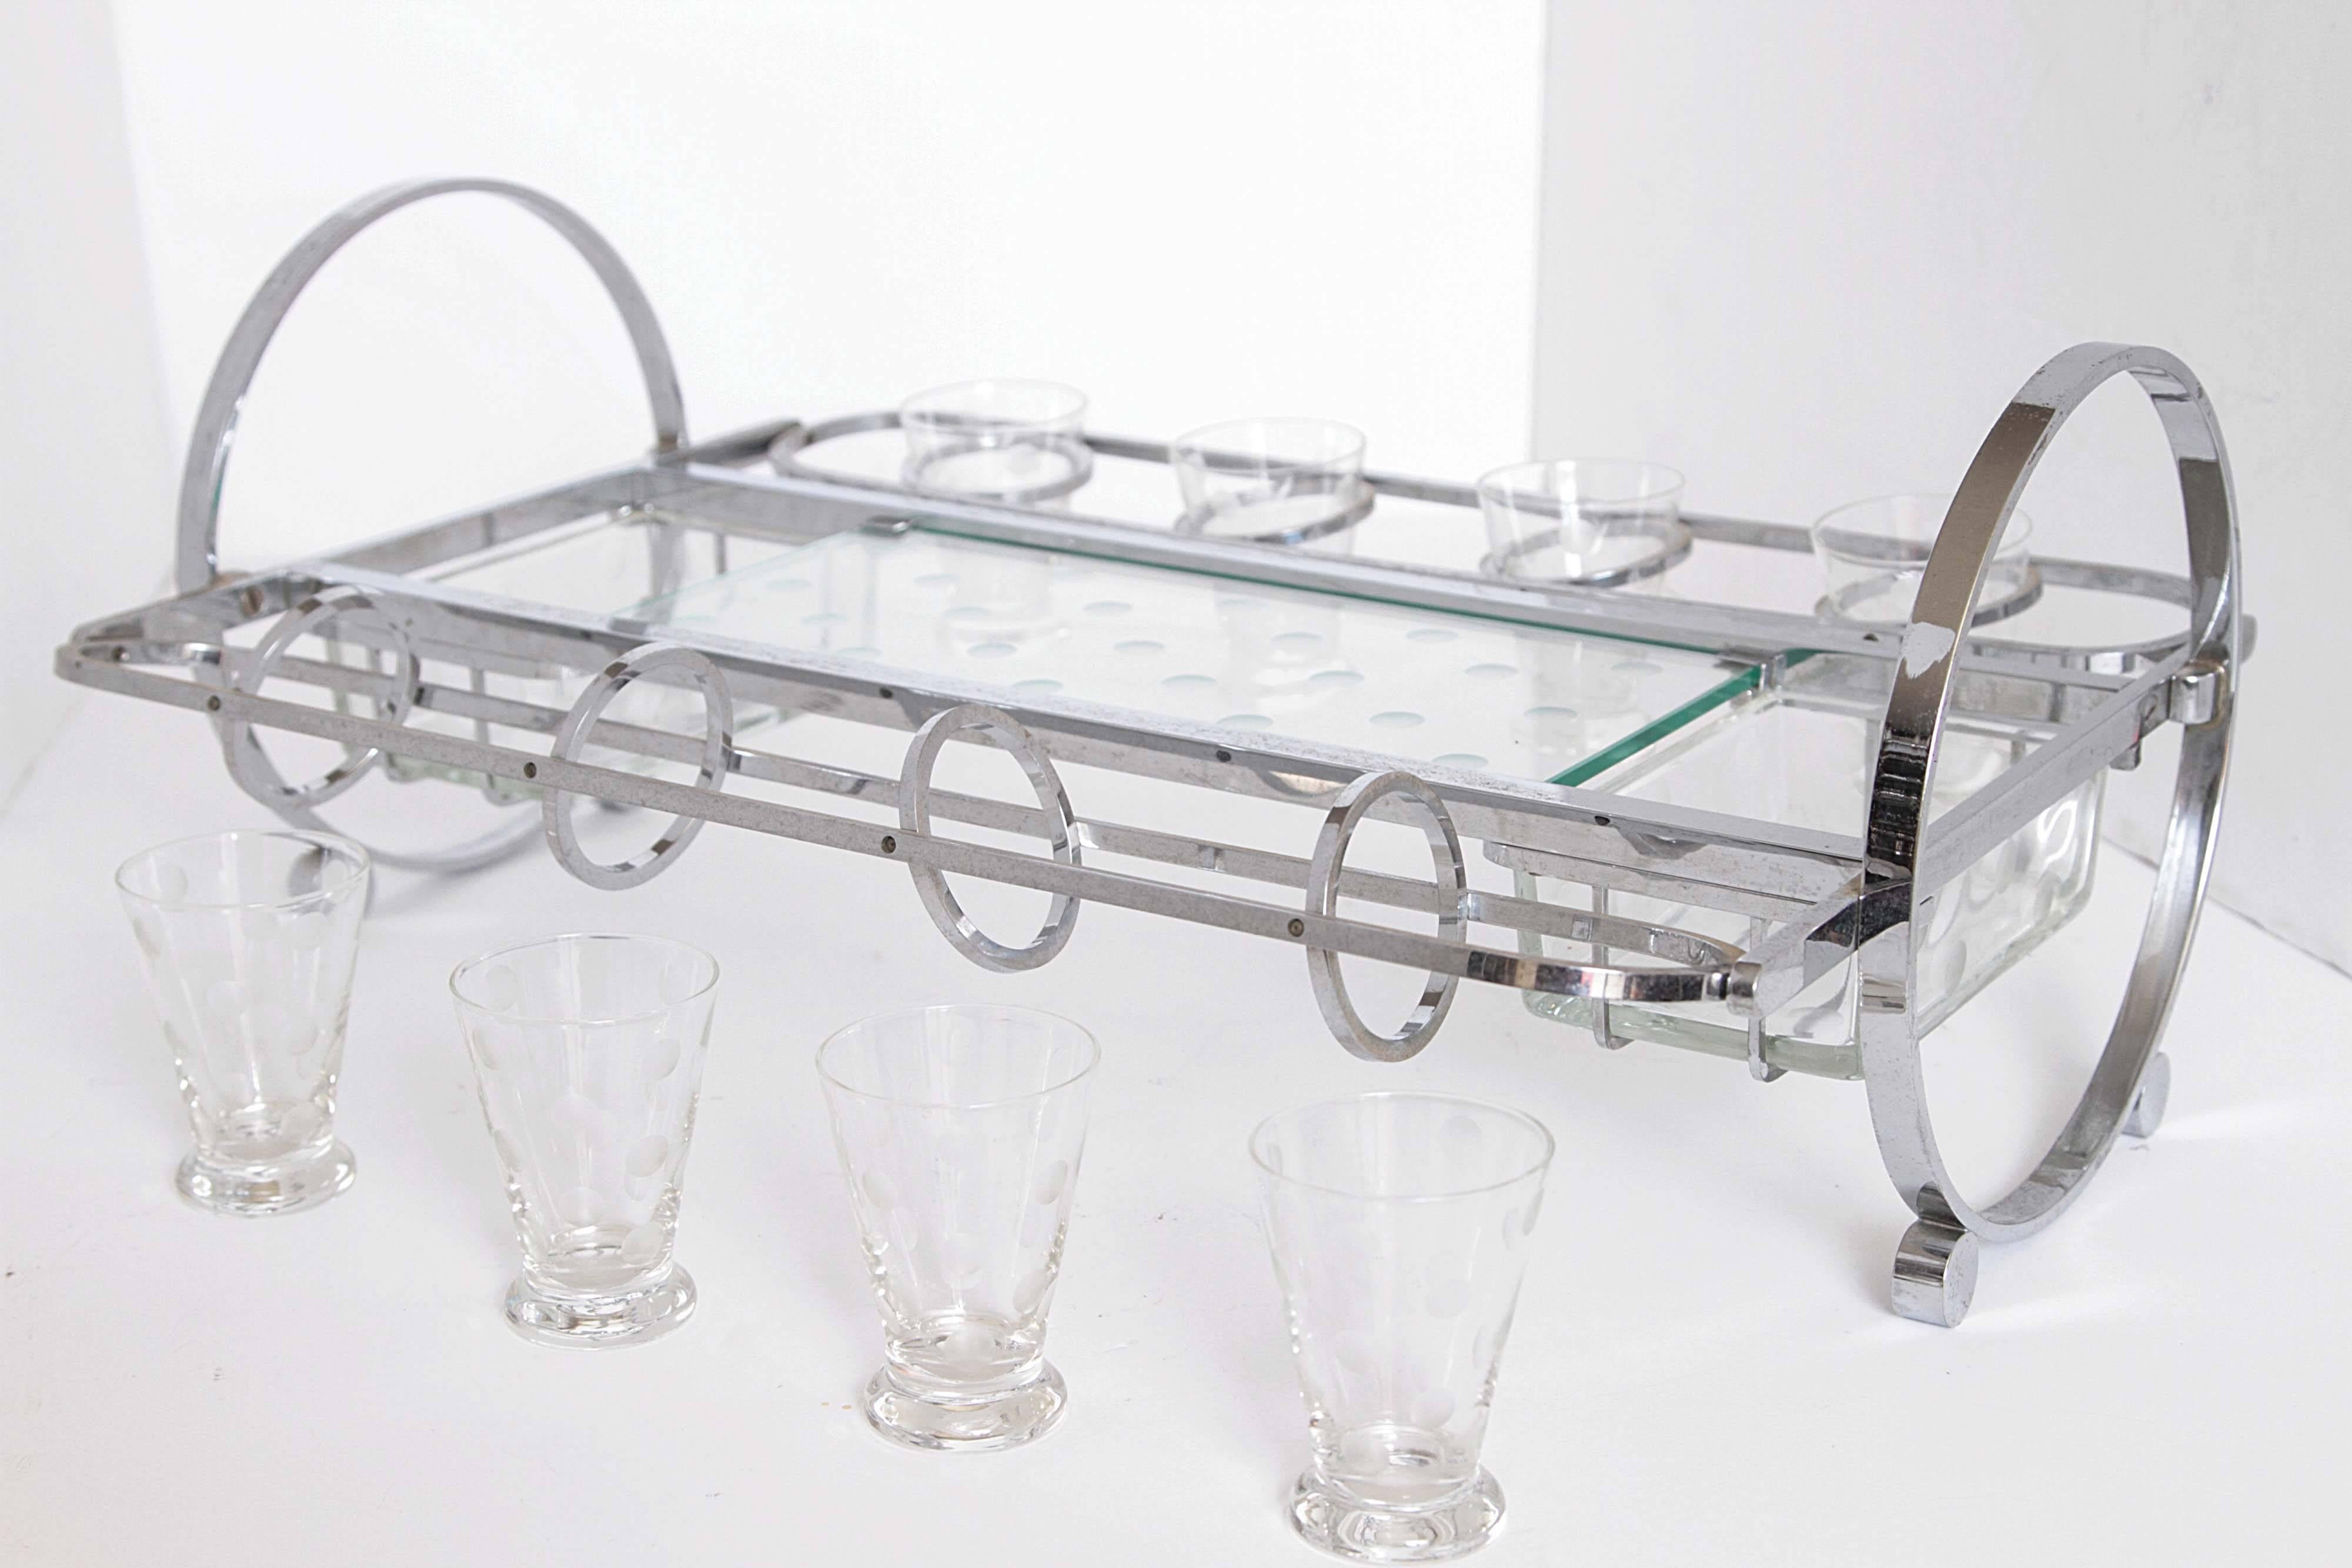 Complete Original Gyroscopic Machine Age Art Deco Cocktail Serving Caddy REDUCED For Sale 1